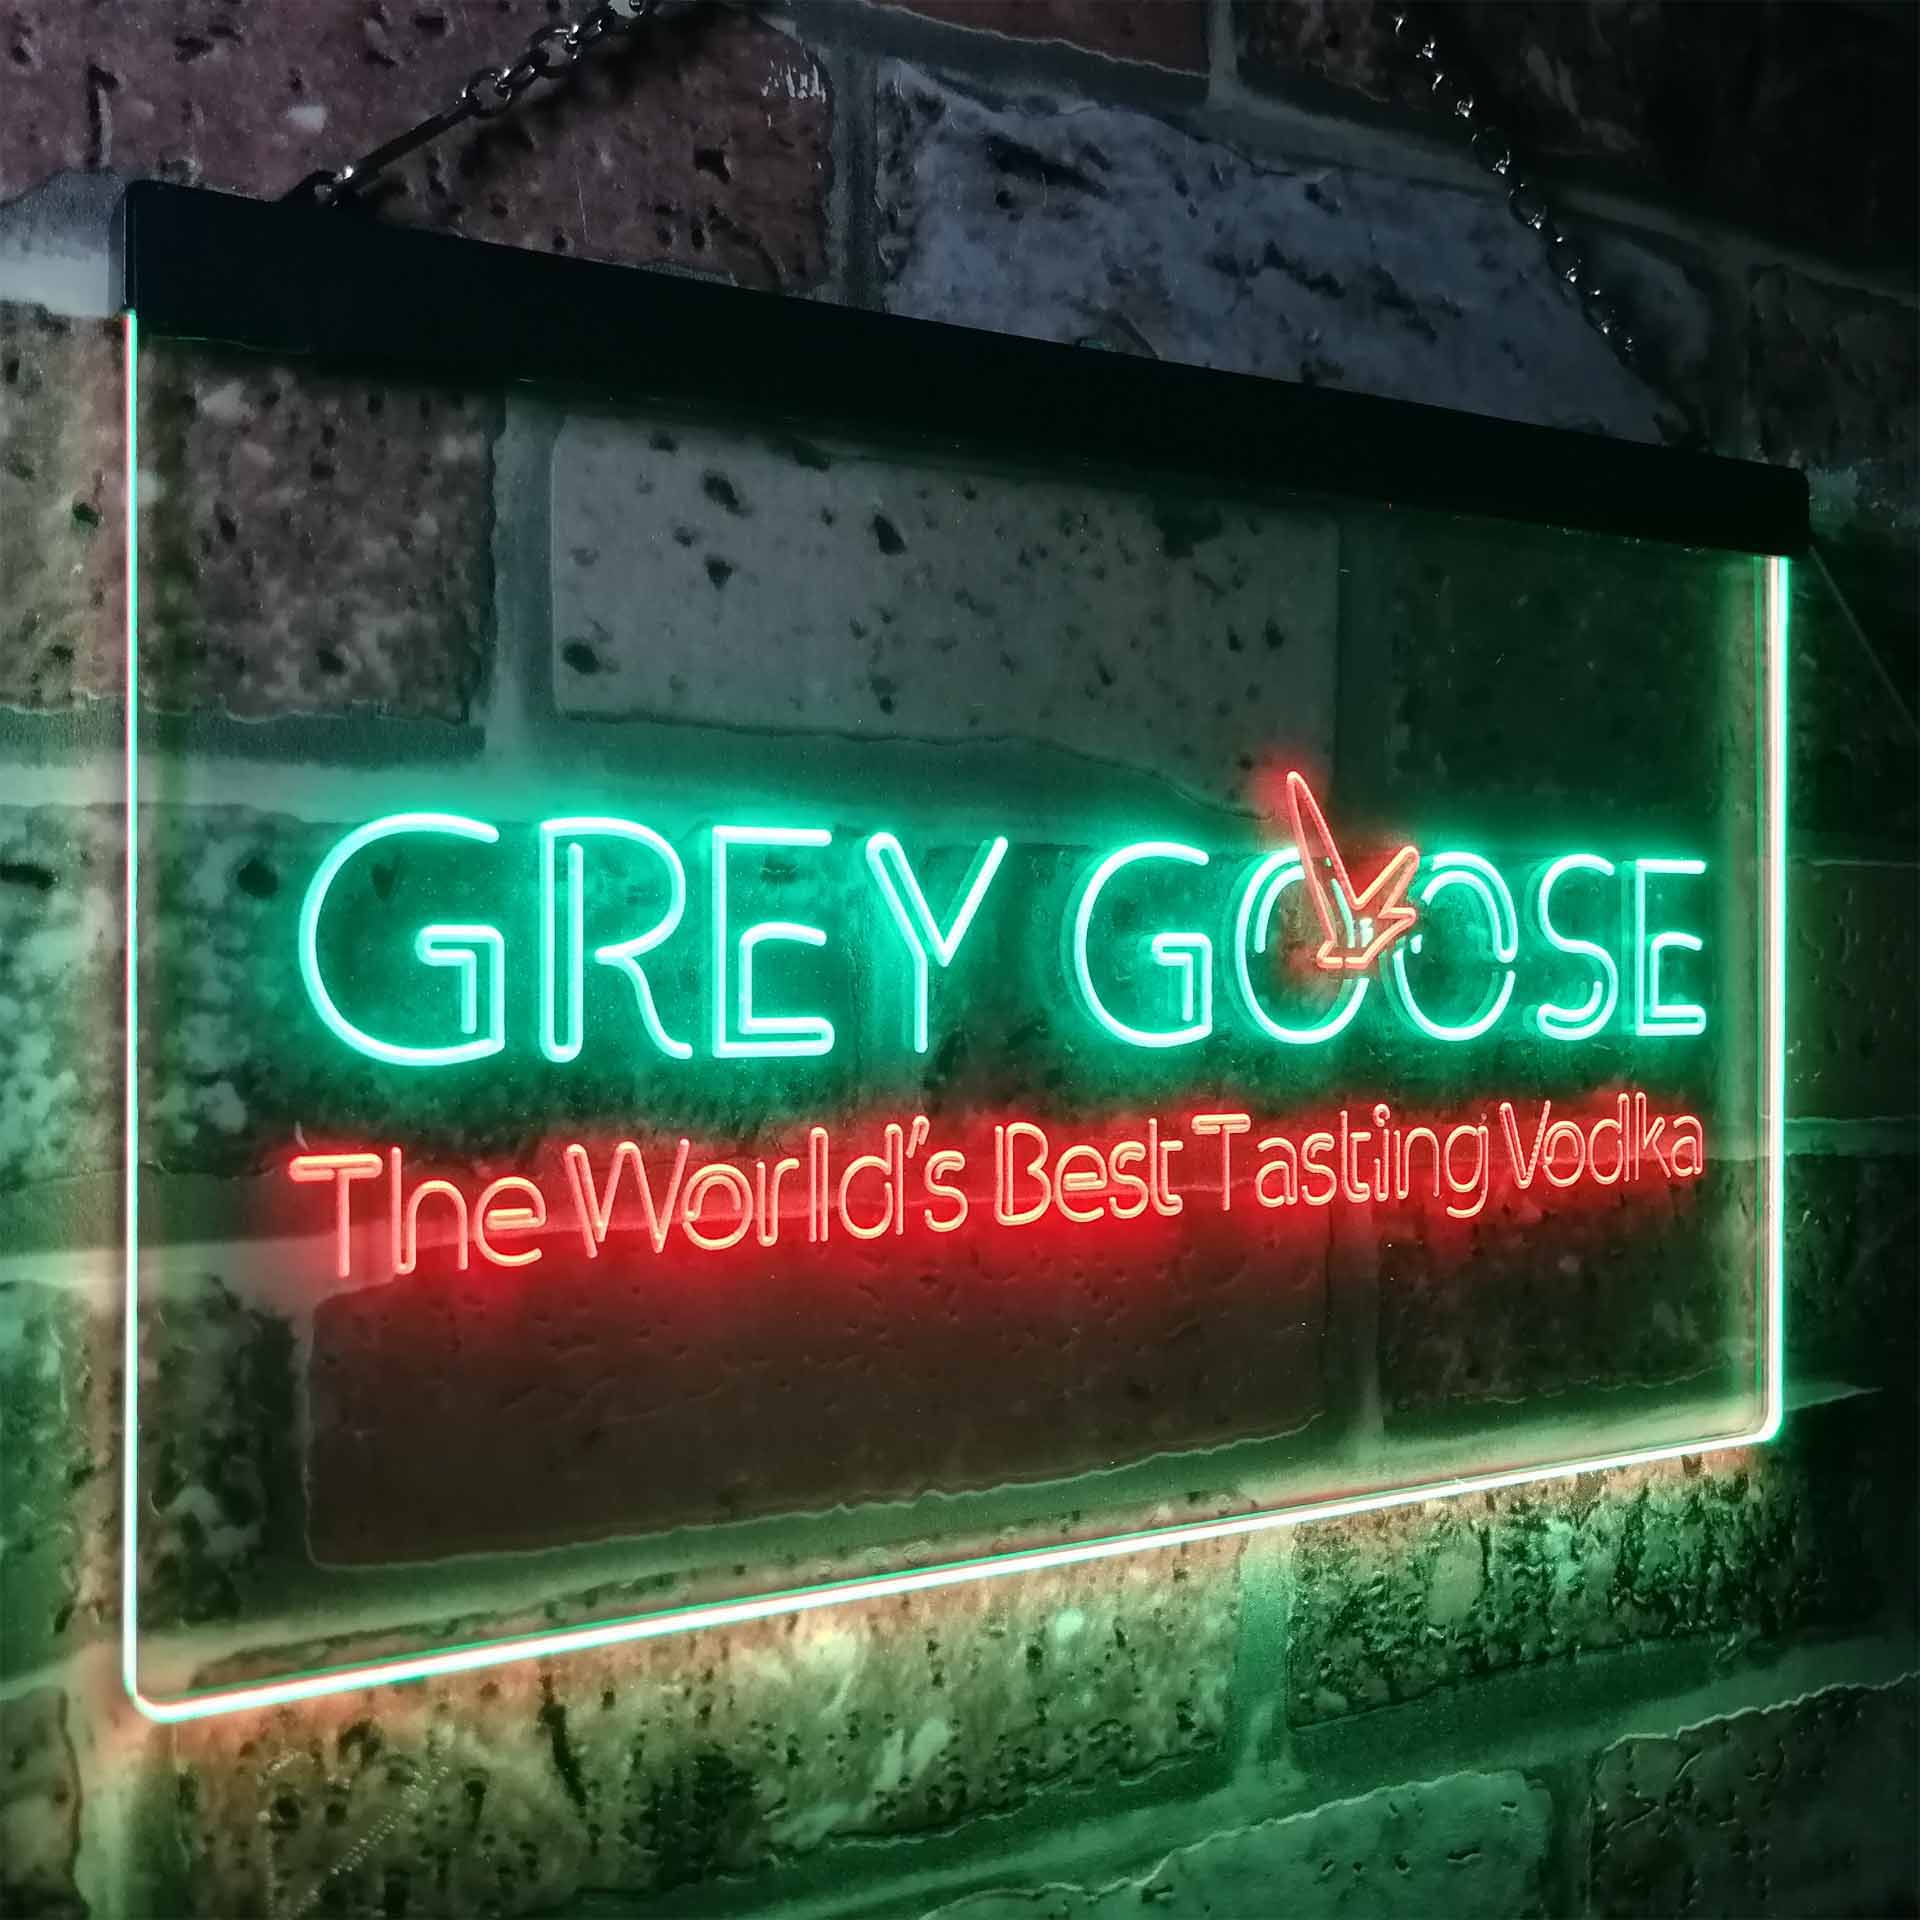 Grey Goose Neon LED Sign